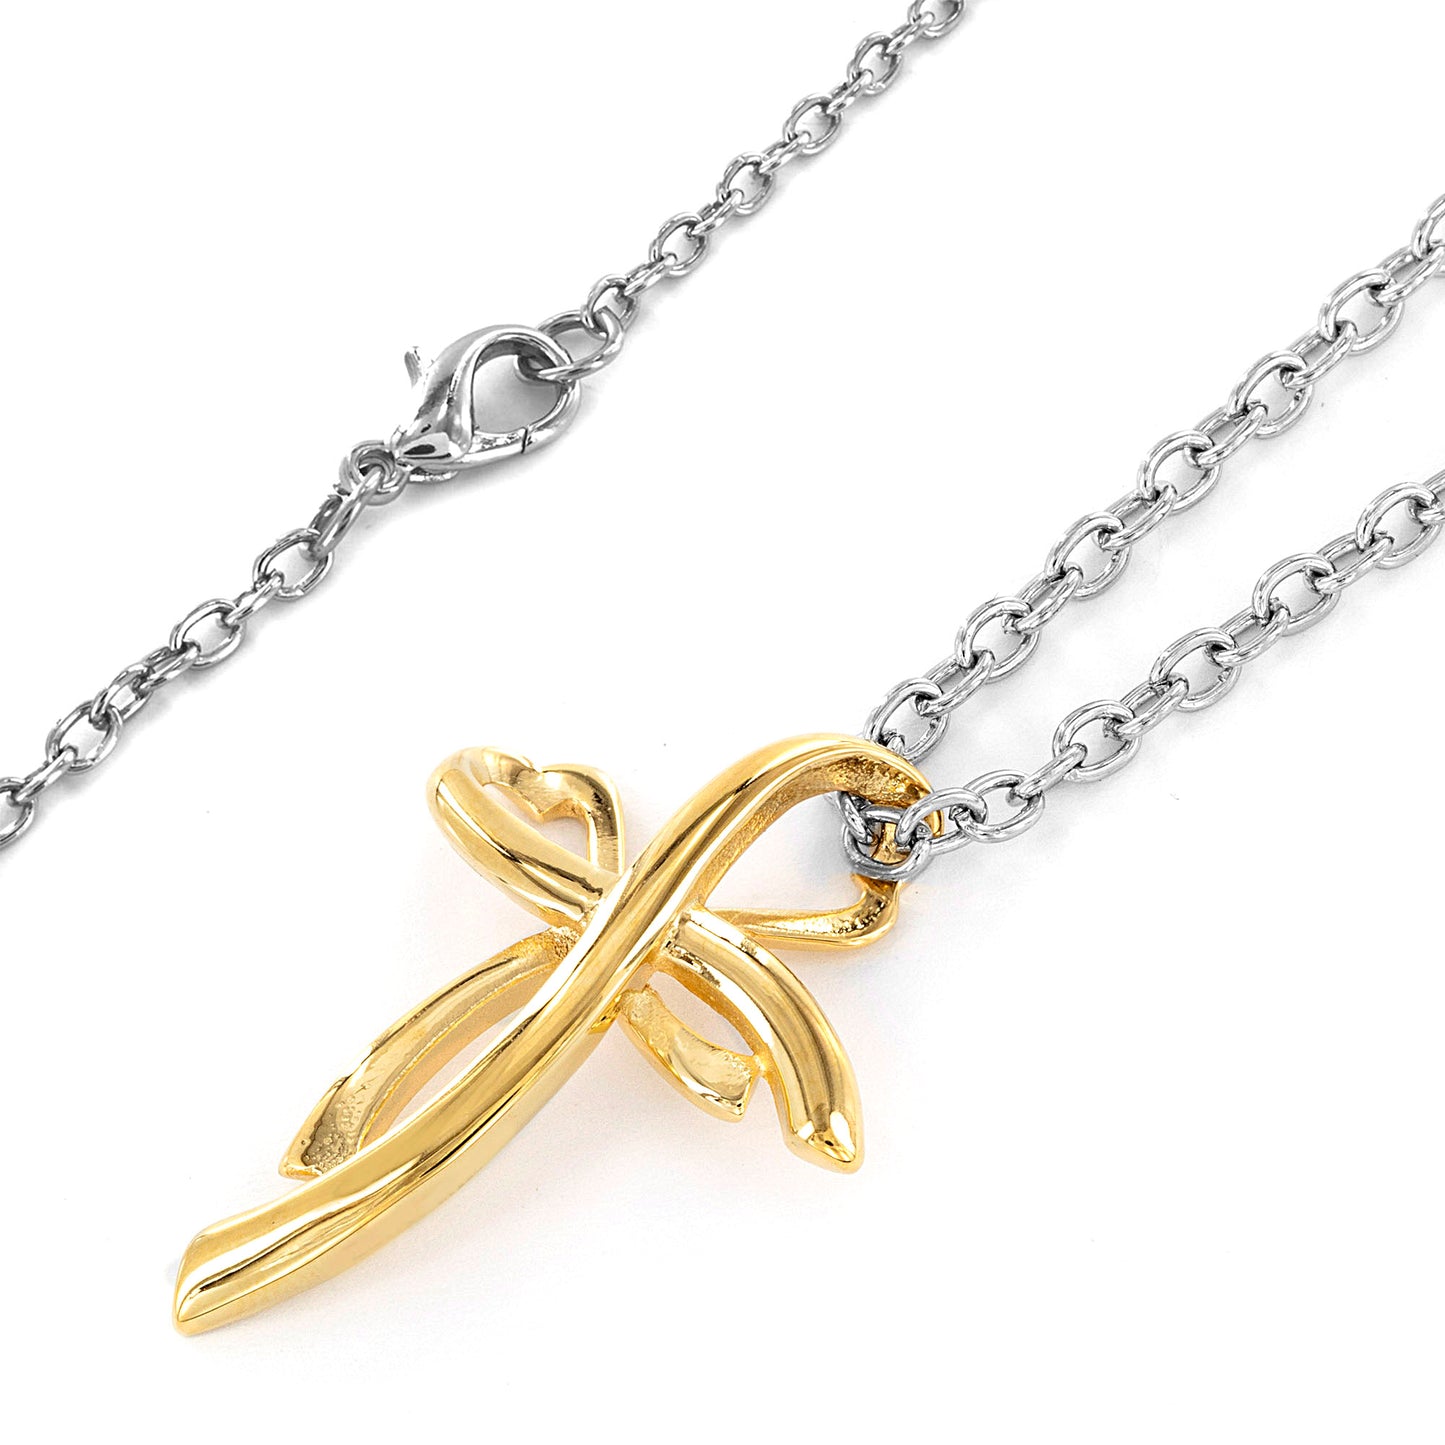 ELYA Polished Infinity Cross Gold Plated Stainless Steel Pendant Necklace - 19"